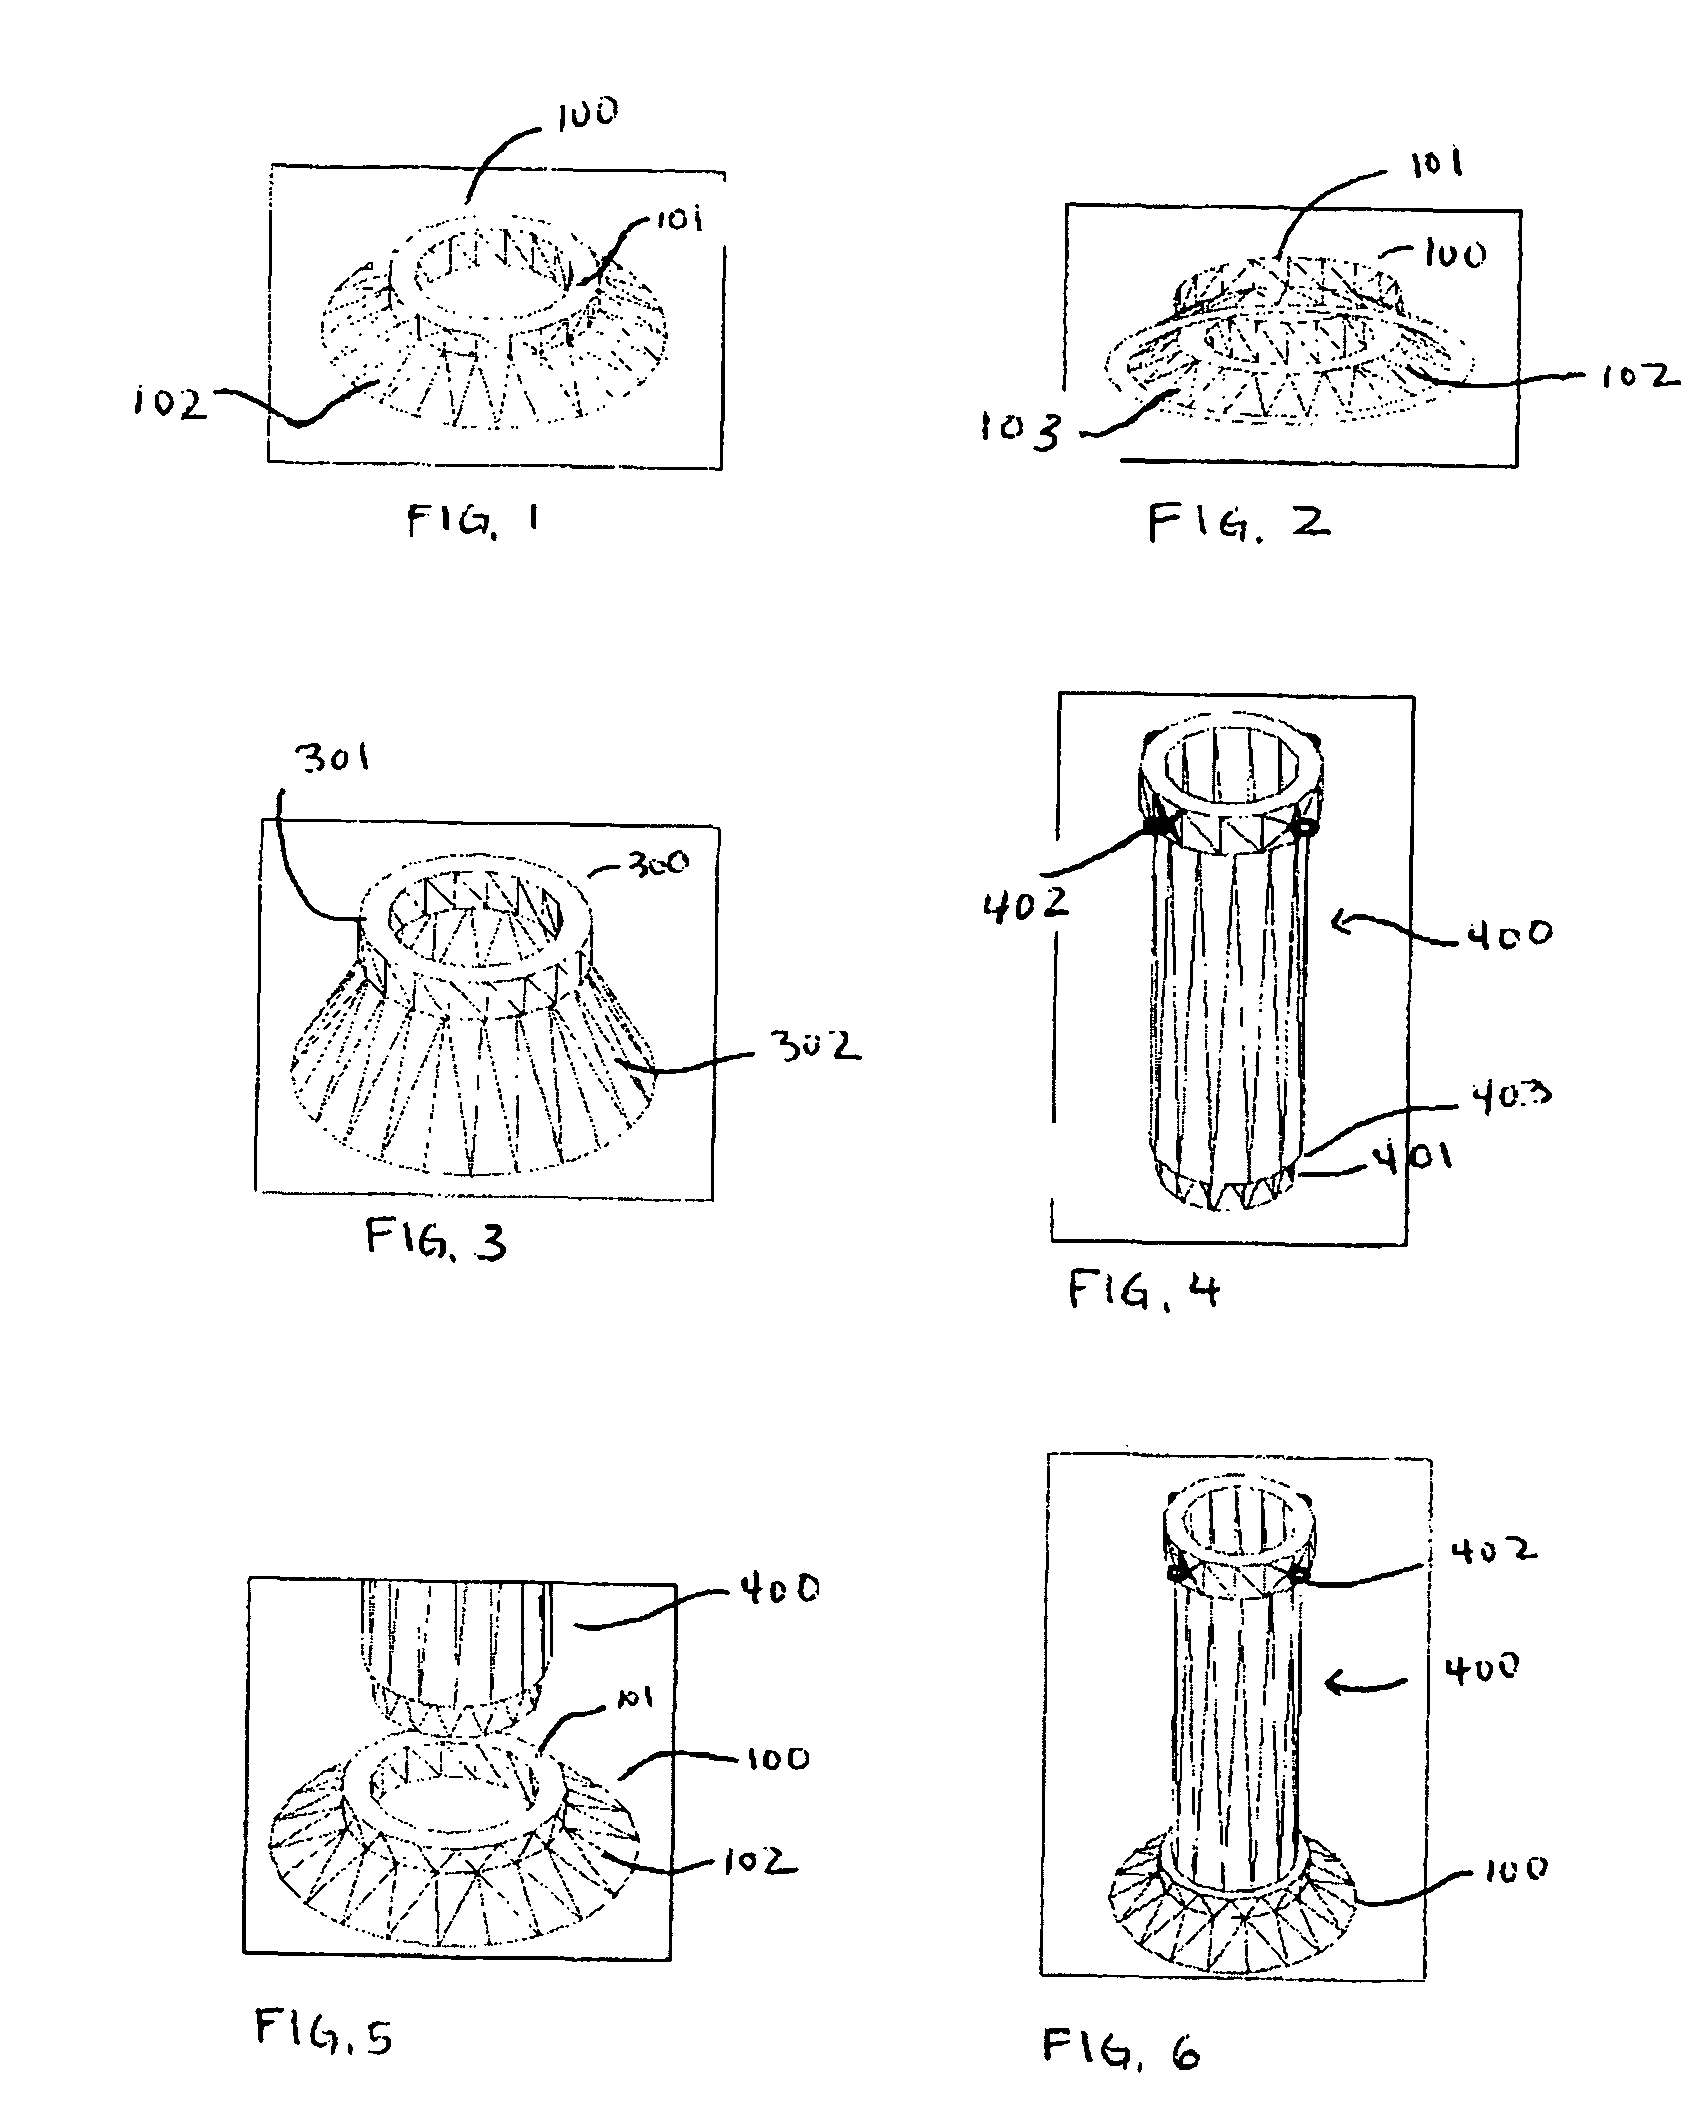 Apparatus and method for minimally invasive implantation of heart assist device